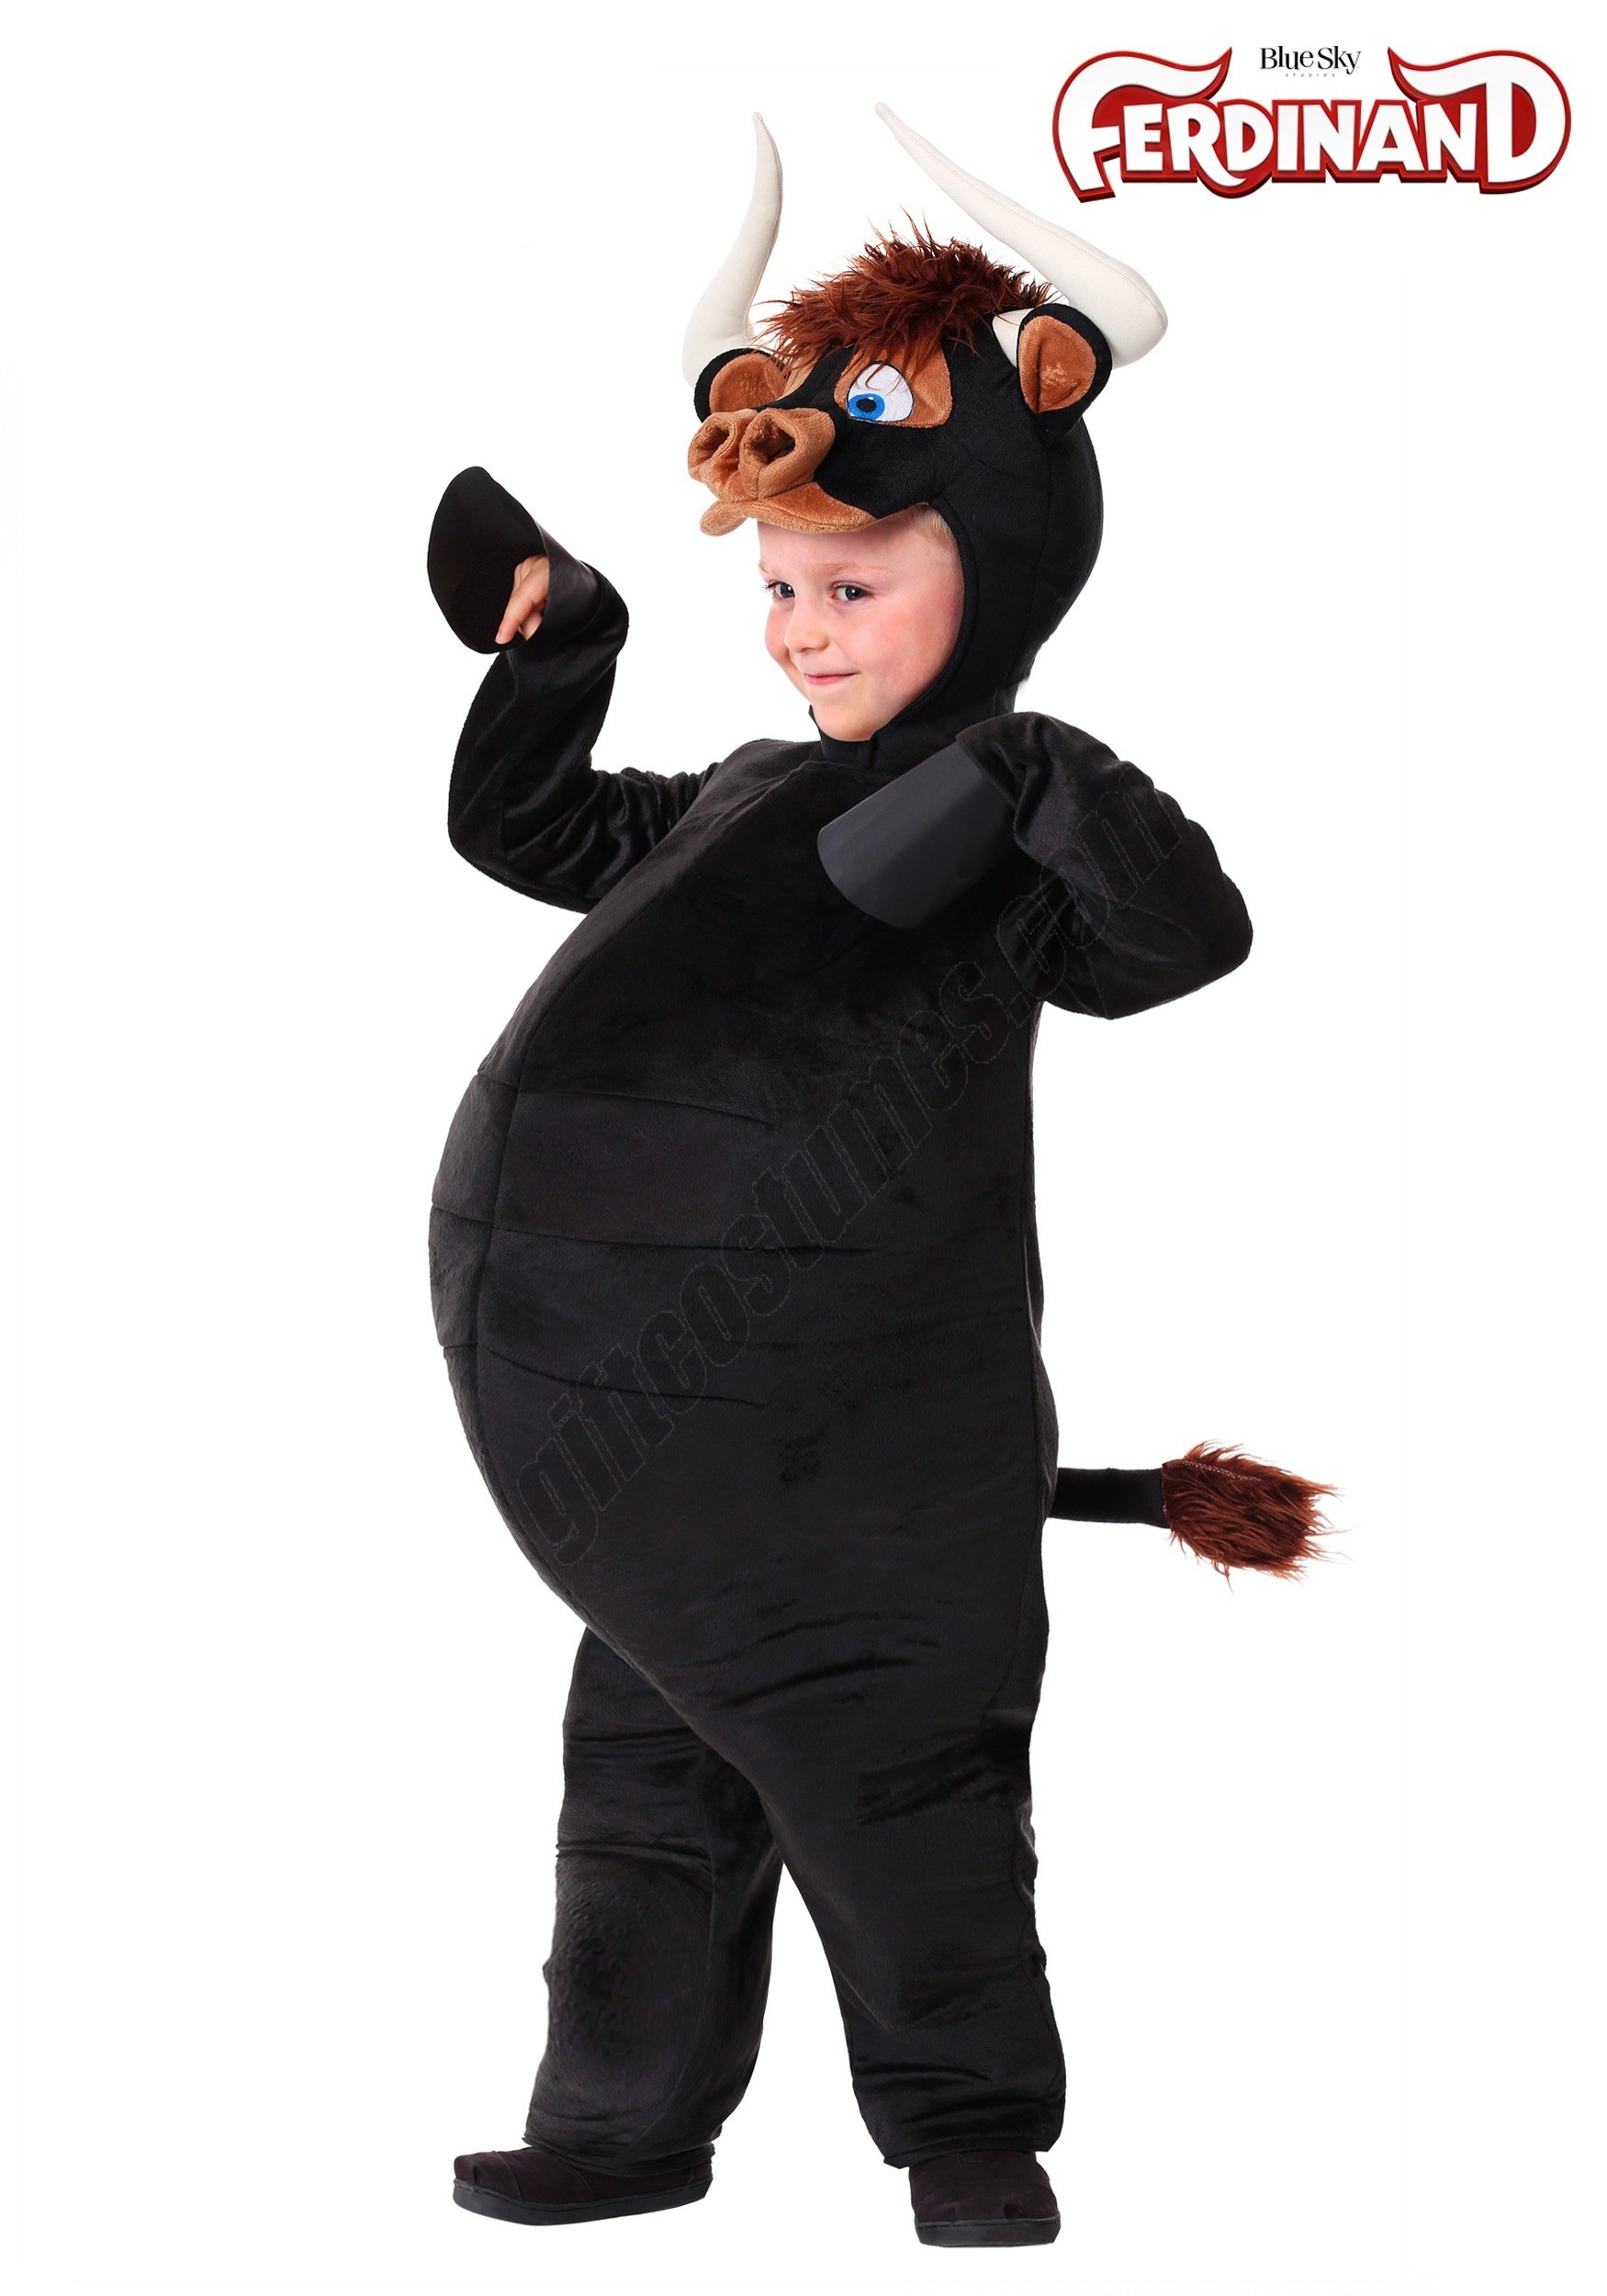 Ferdinand Bull Costume for Toddlers Promotions - Ferdinand Bull Costume for Toddlers Promotions